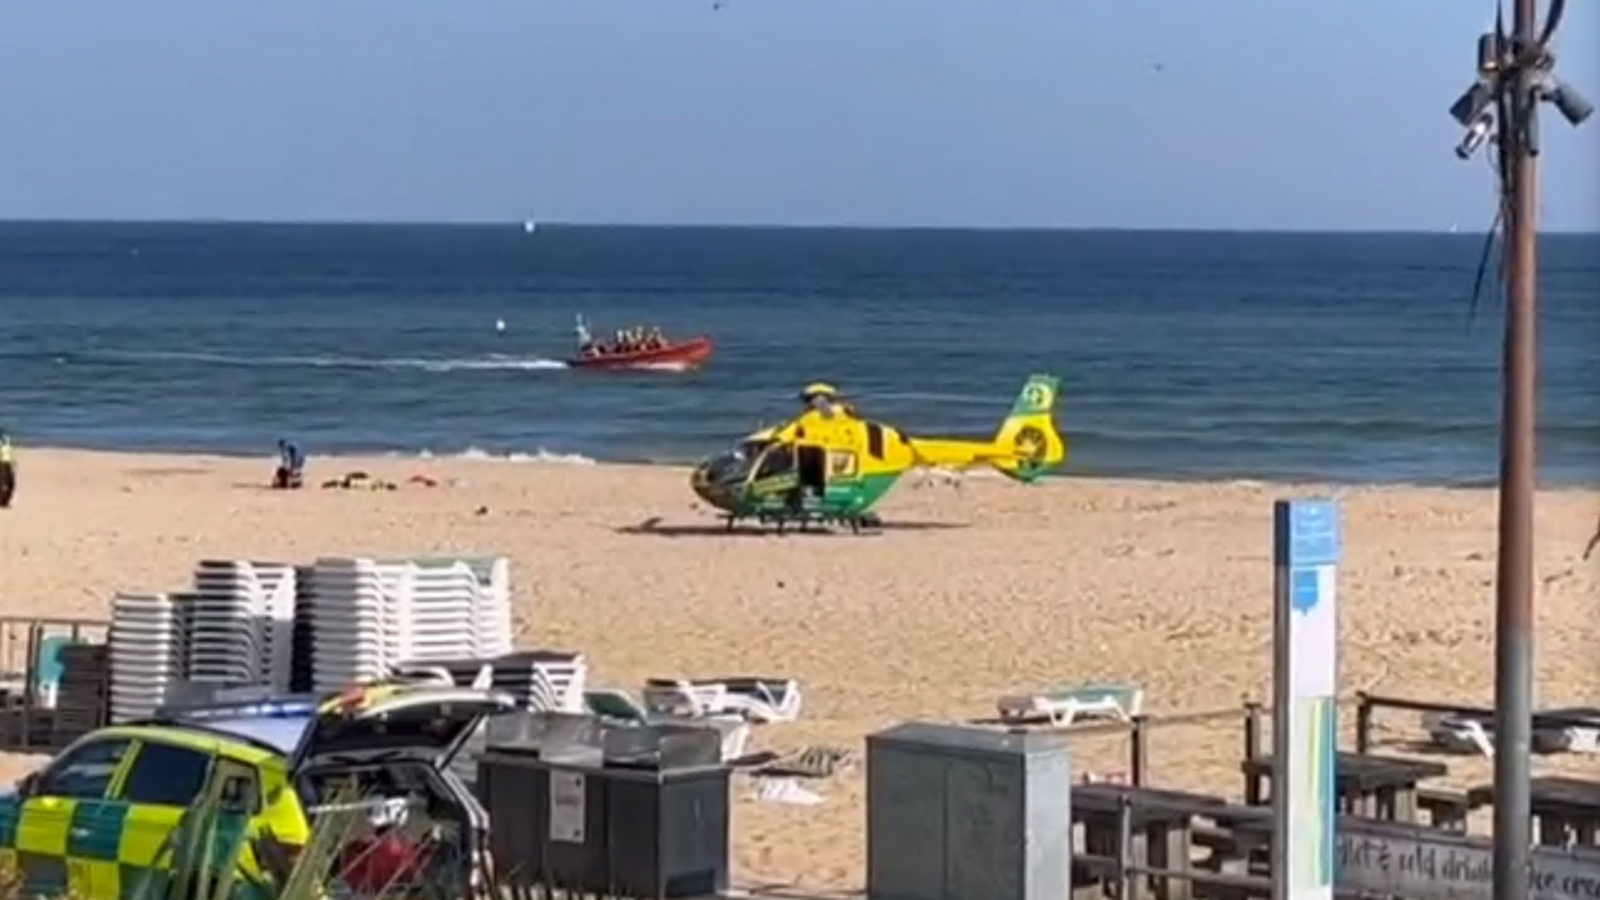 Boy and girl die after incident off beach